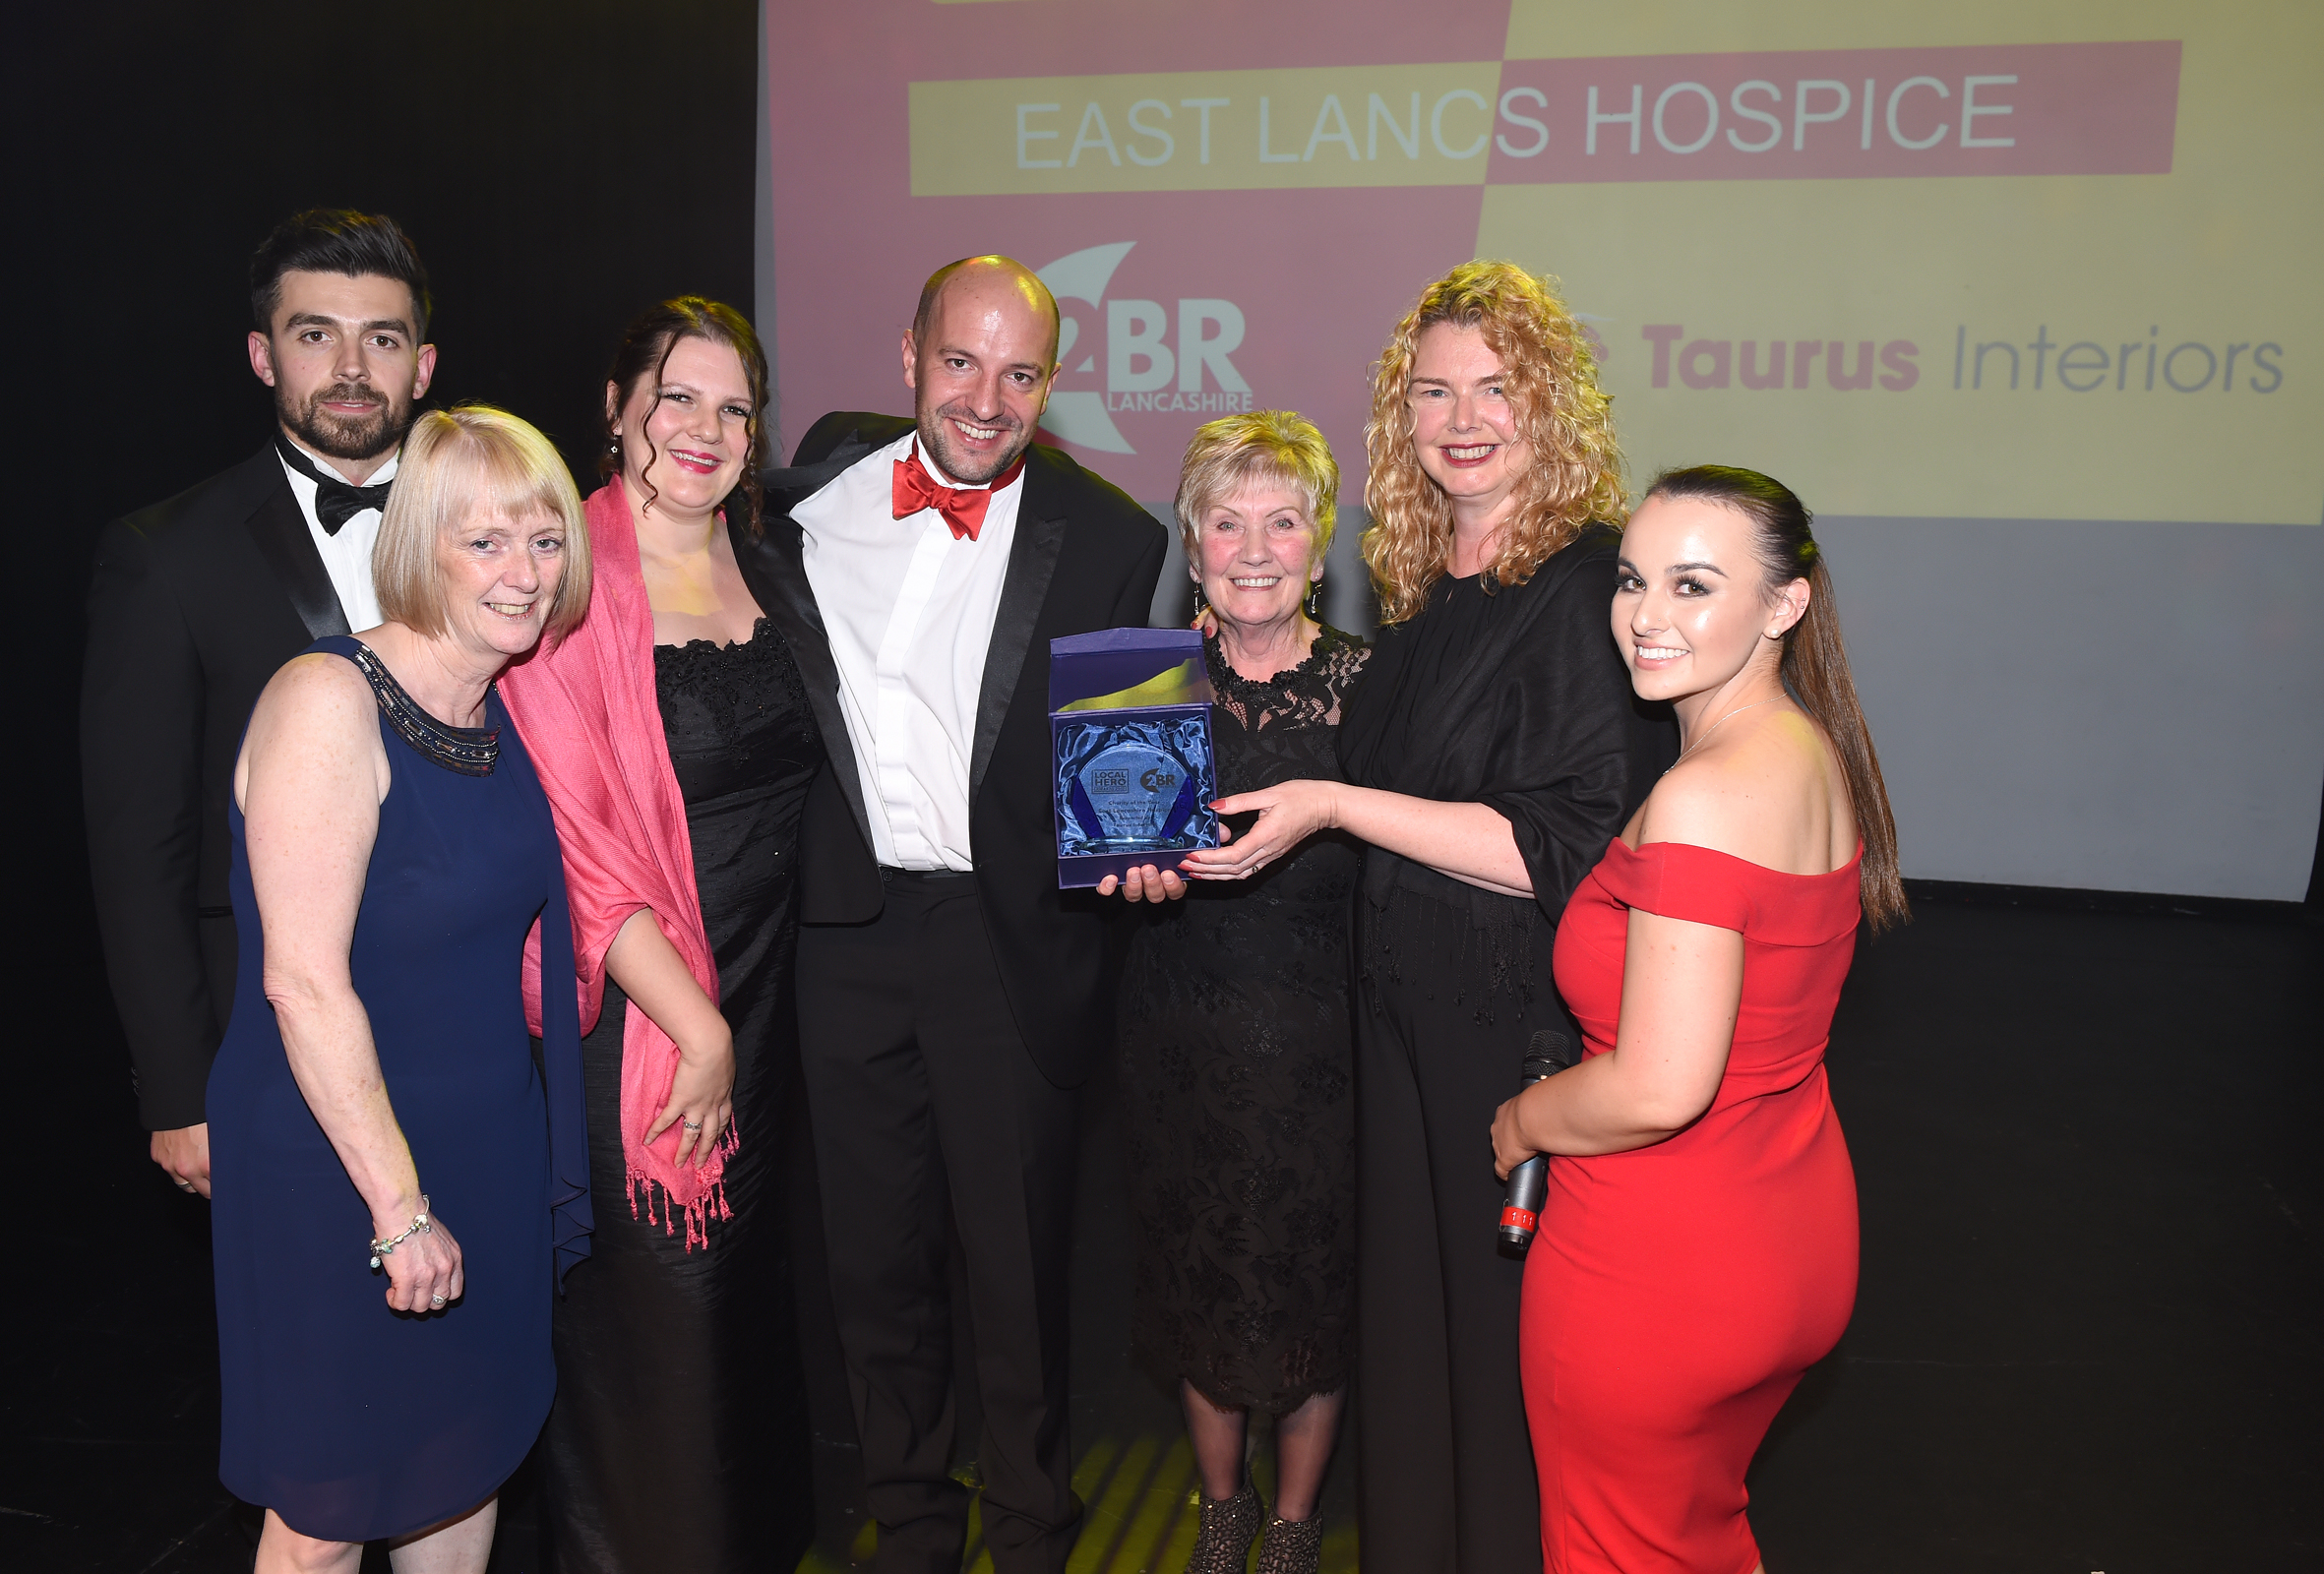 ELH 2br charity of the year